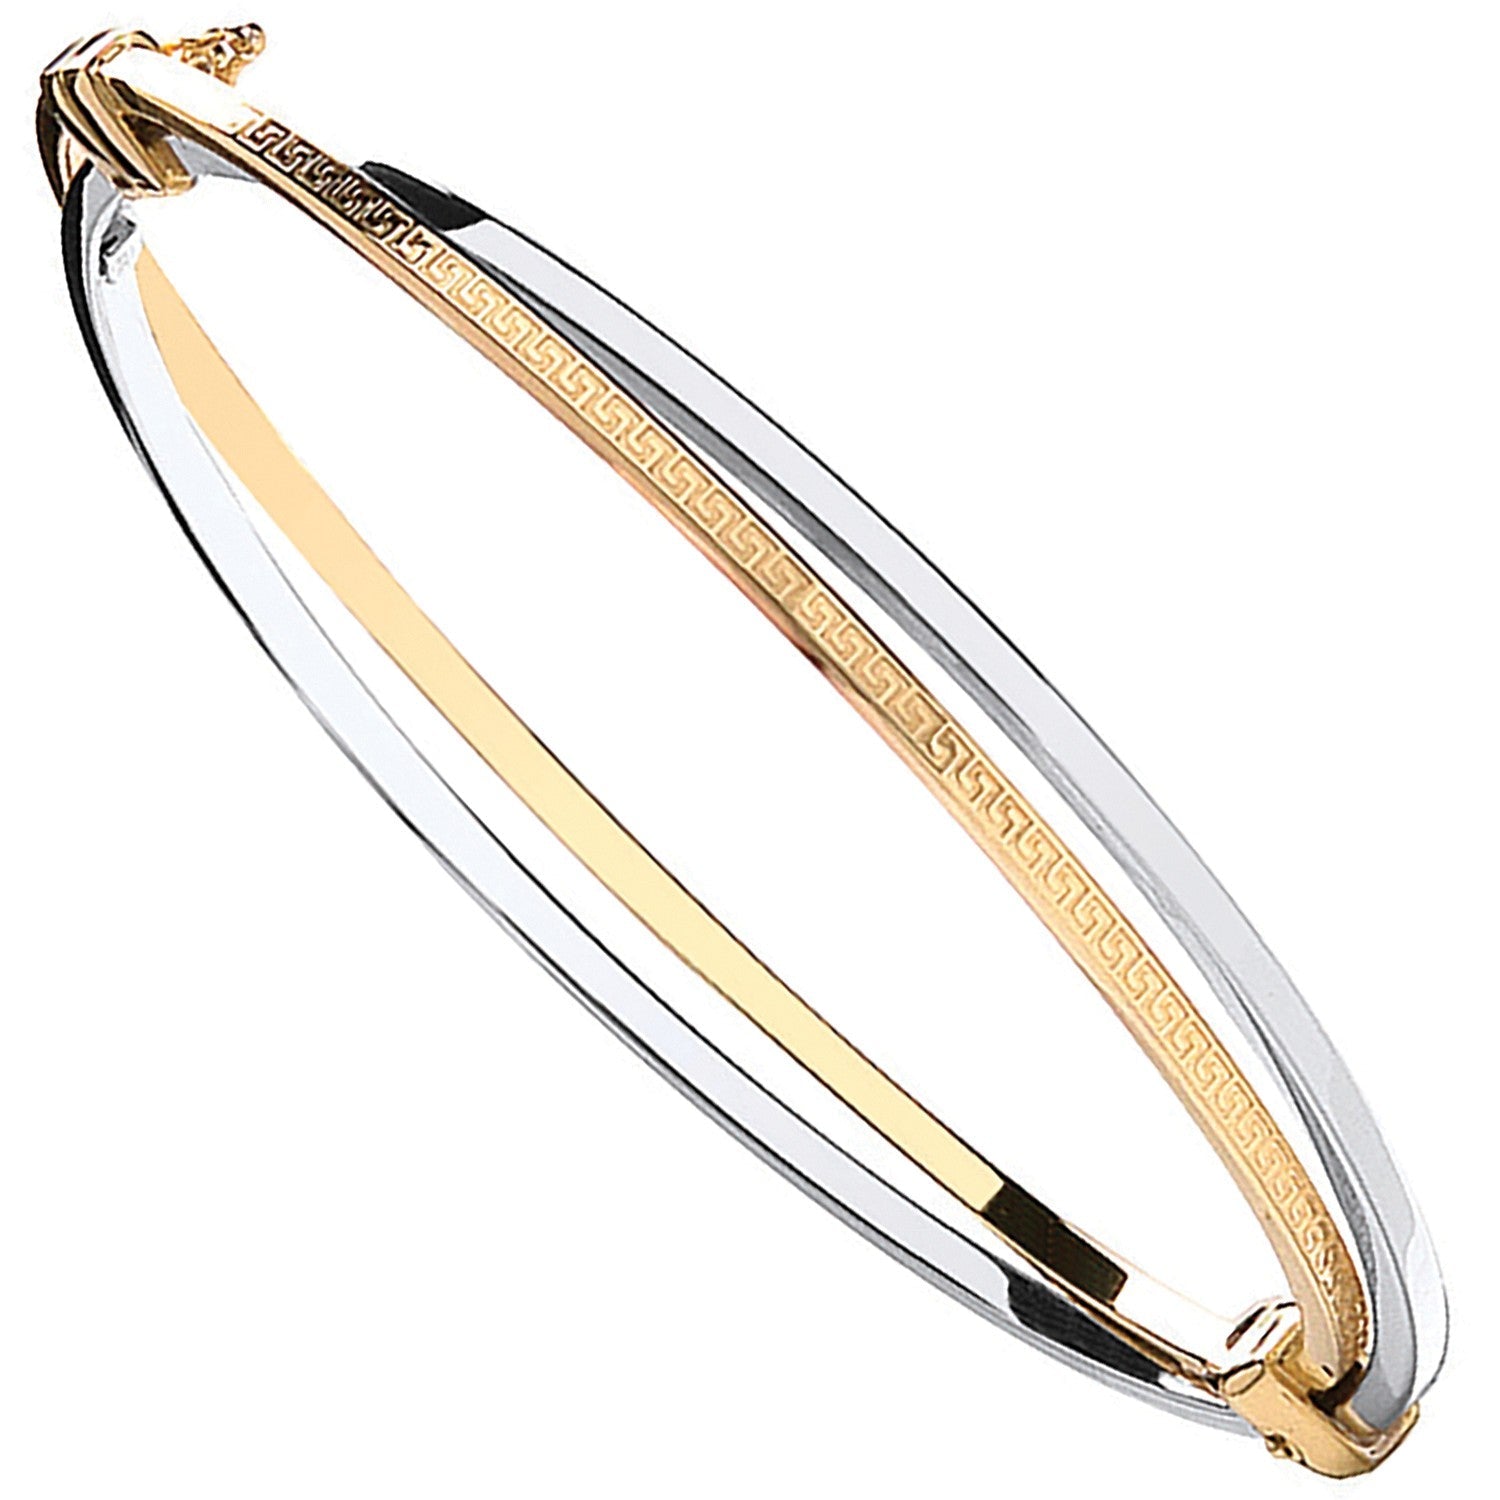 9ct Yellow And White Gold Bangle 8.4mm - FJewellery